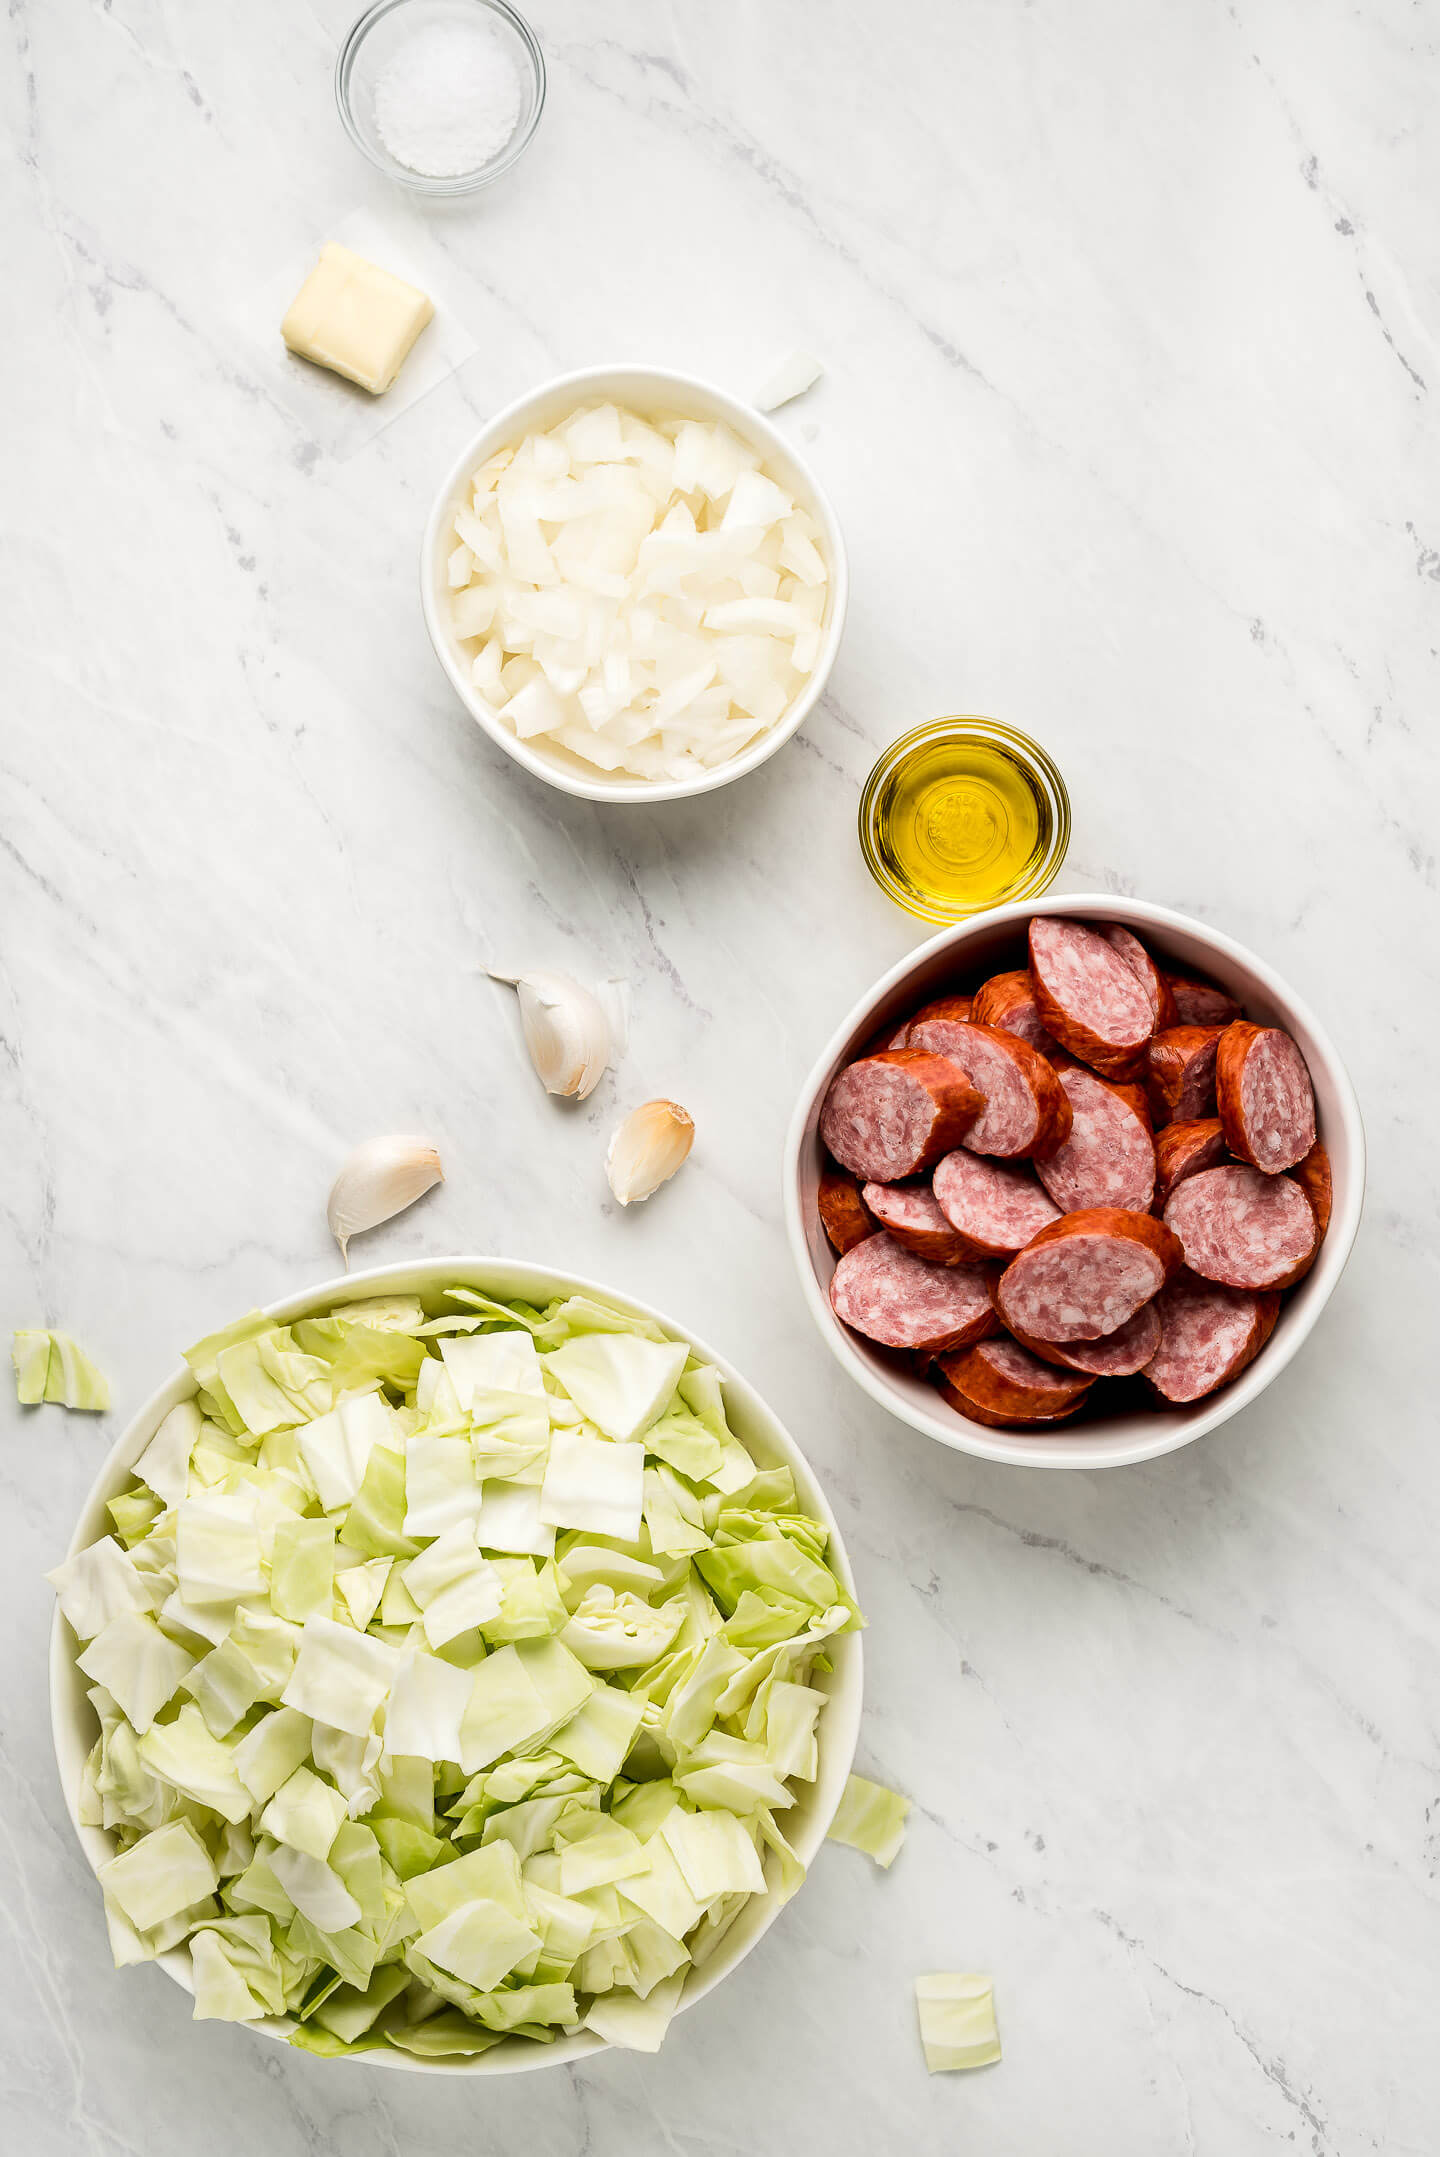 Ingredients on a marble surface- onions, butter, oil, sausage, garlic, and cabbage.